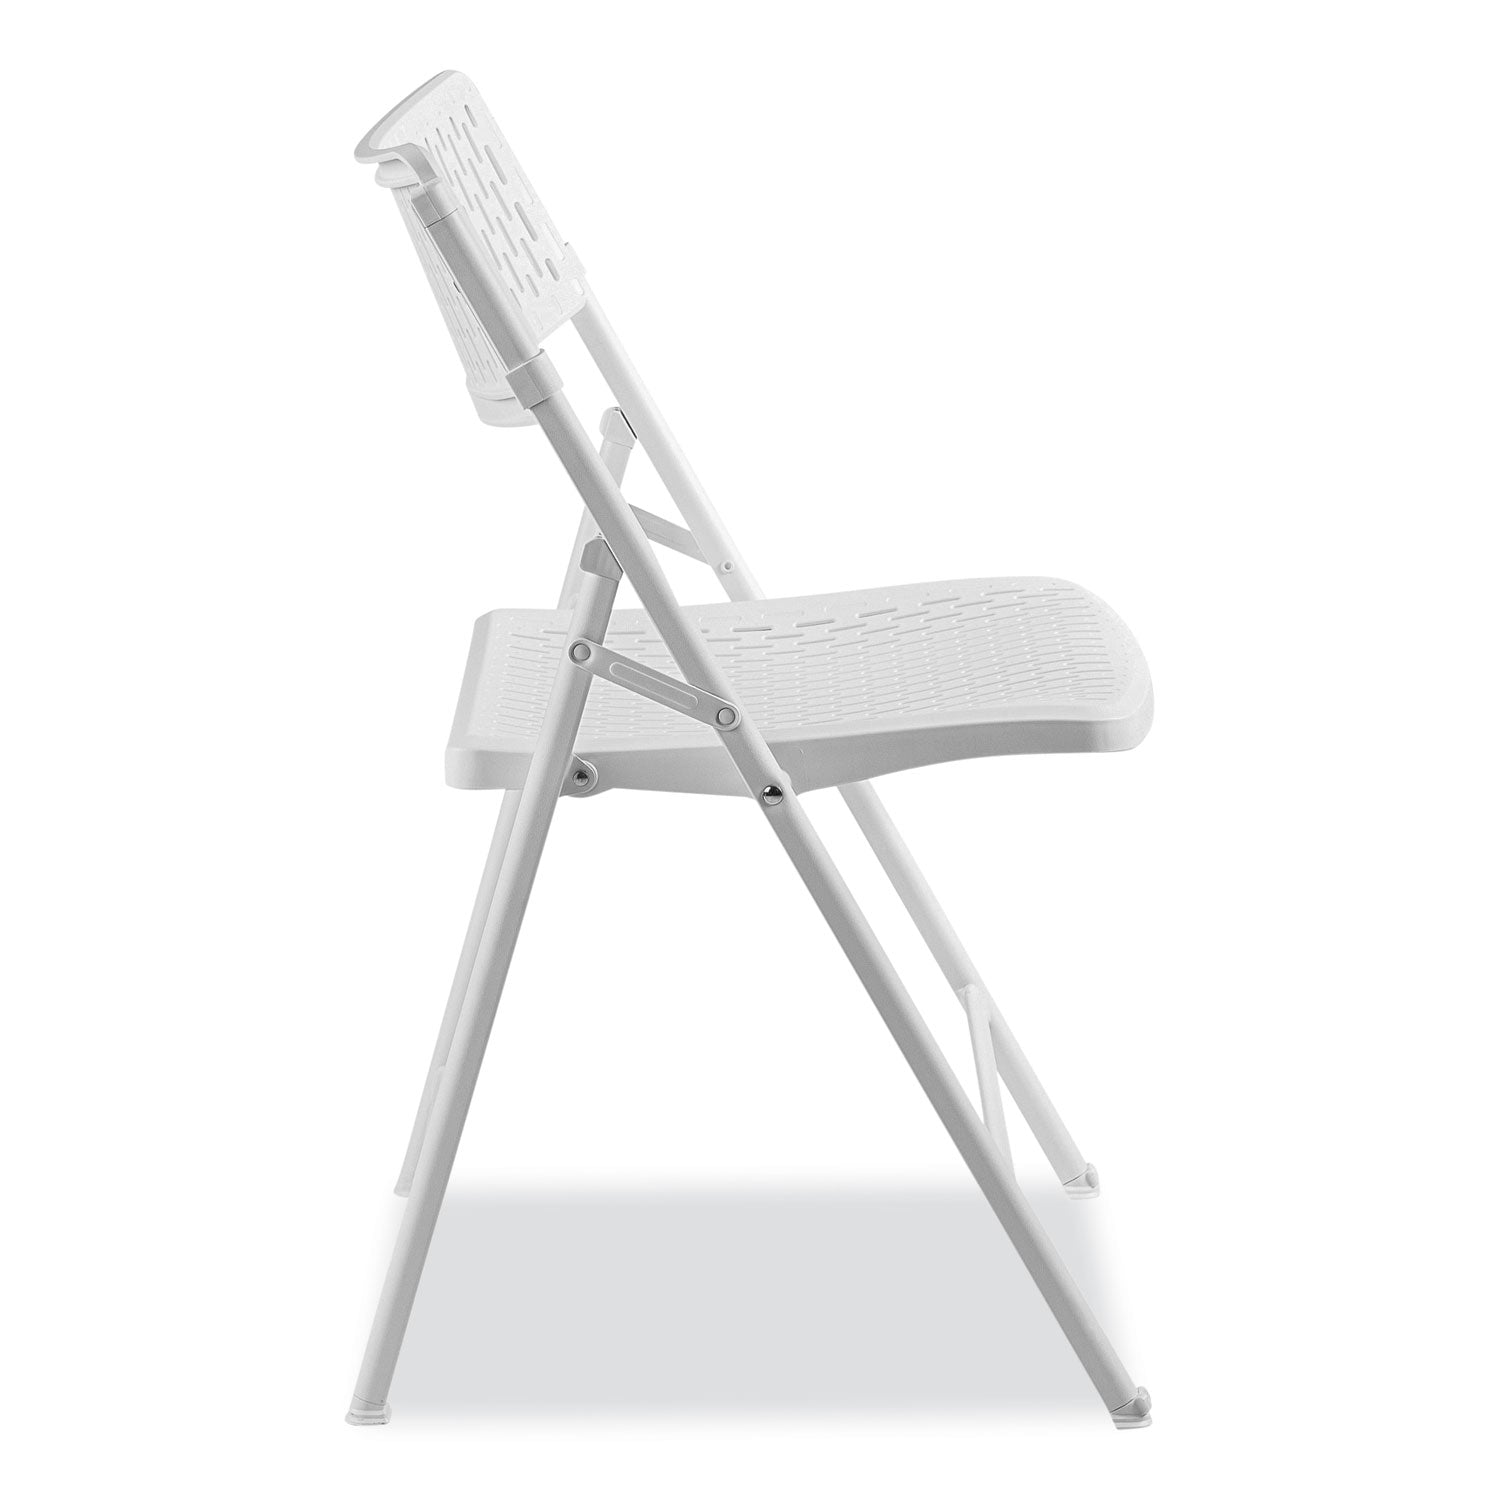 airflex-series-premium-poly-folding-chair-supports-1000-lb-1725-seat-ht-white-seat-back-base-4-ctships-in-1-3-bus-days_nps1421 - 4